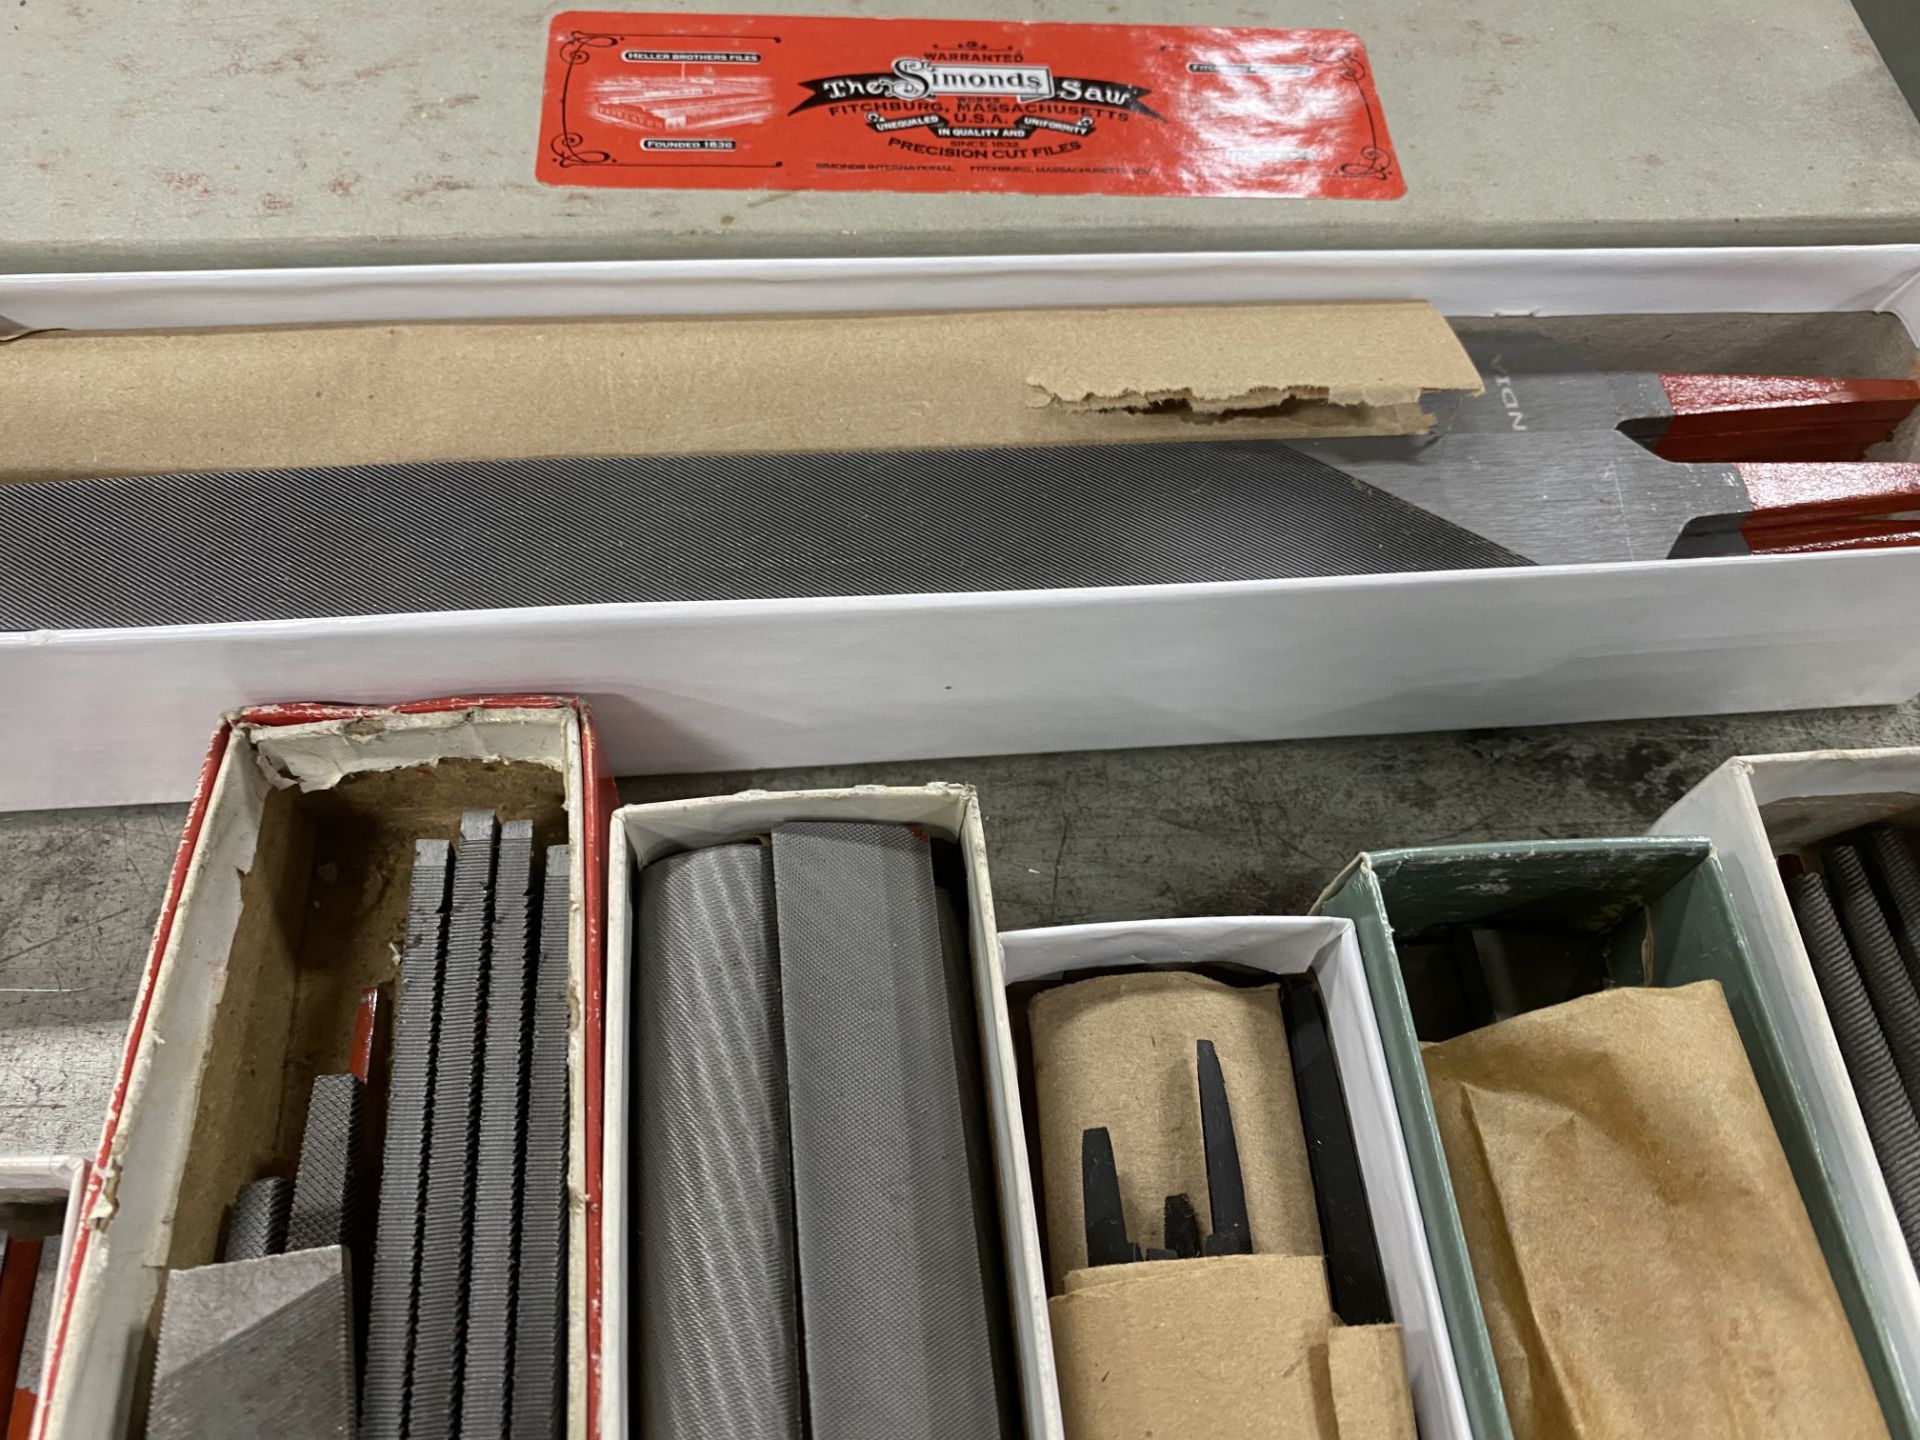 Lot of NEW Precision Cut Files and Handles - Image 6 of 8